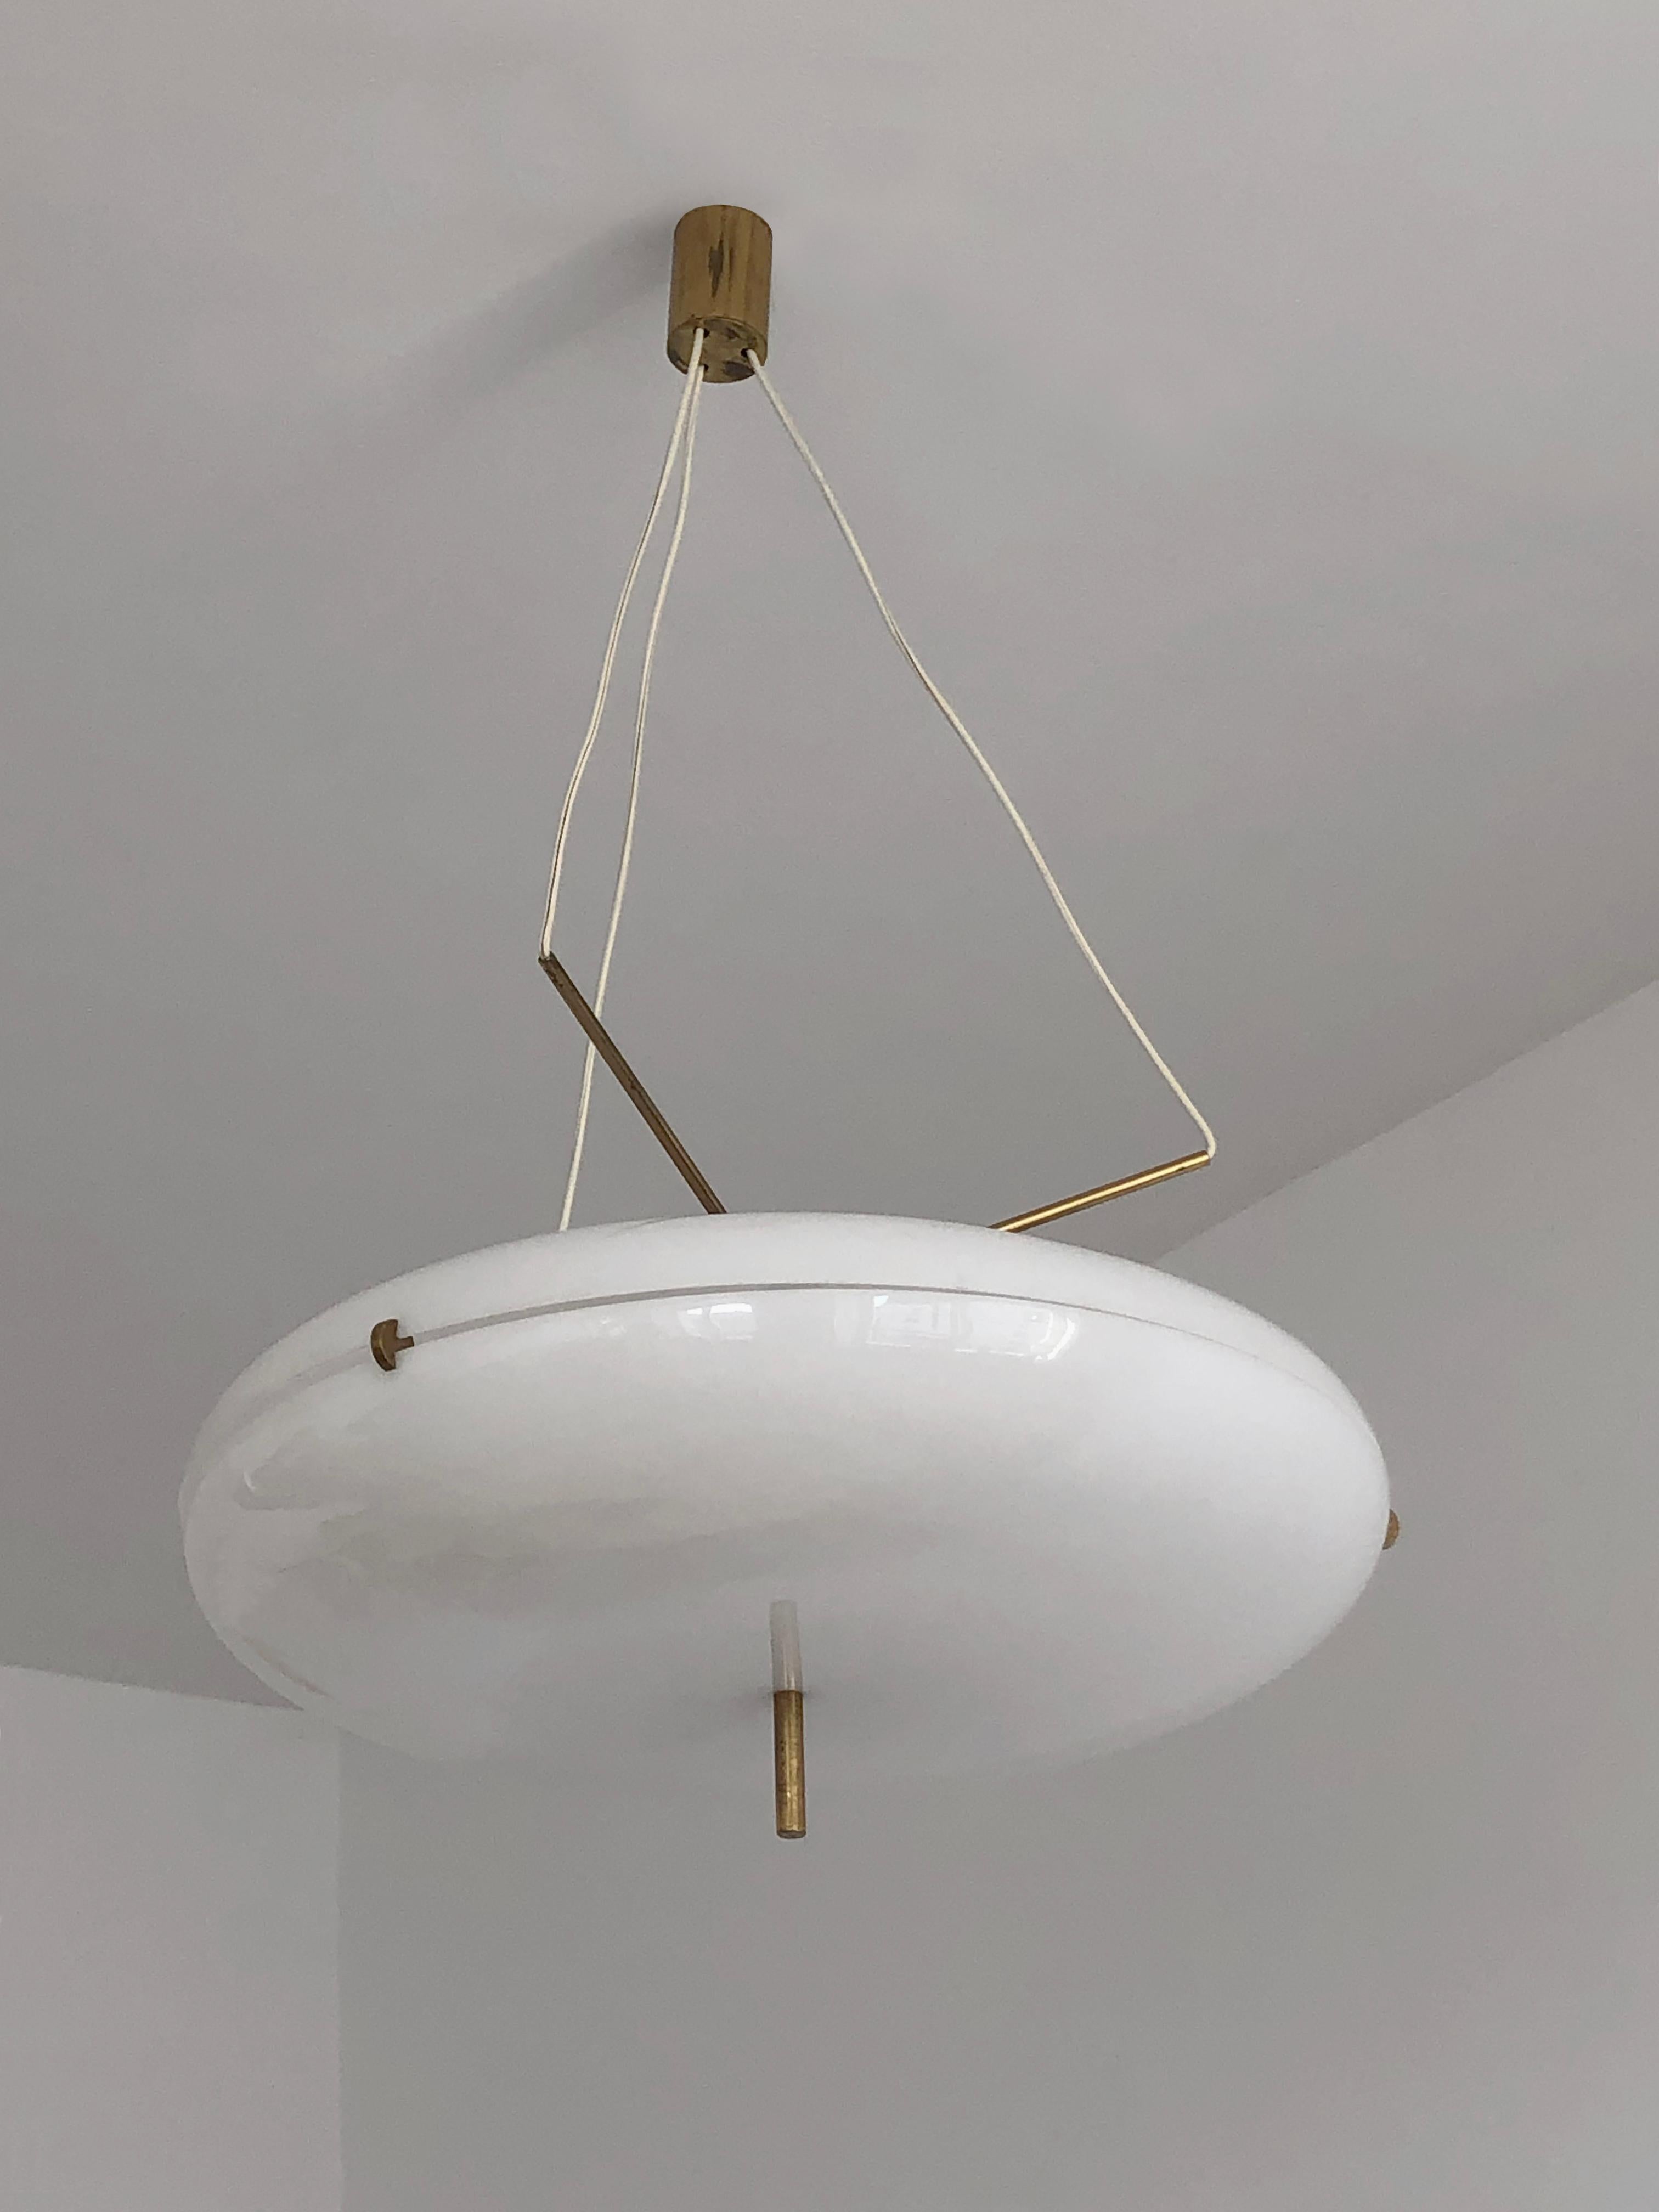 A MID-CENTURY-MODERN MODERNIST SPACE-AGE Ceiling Light by STILNOVO, Italy 1960  For Sale 2